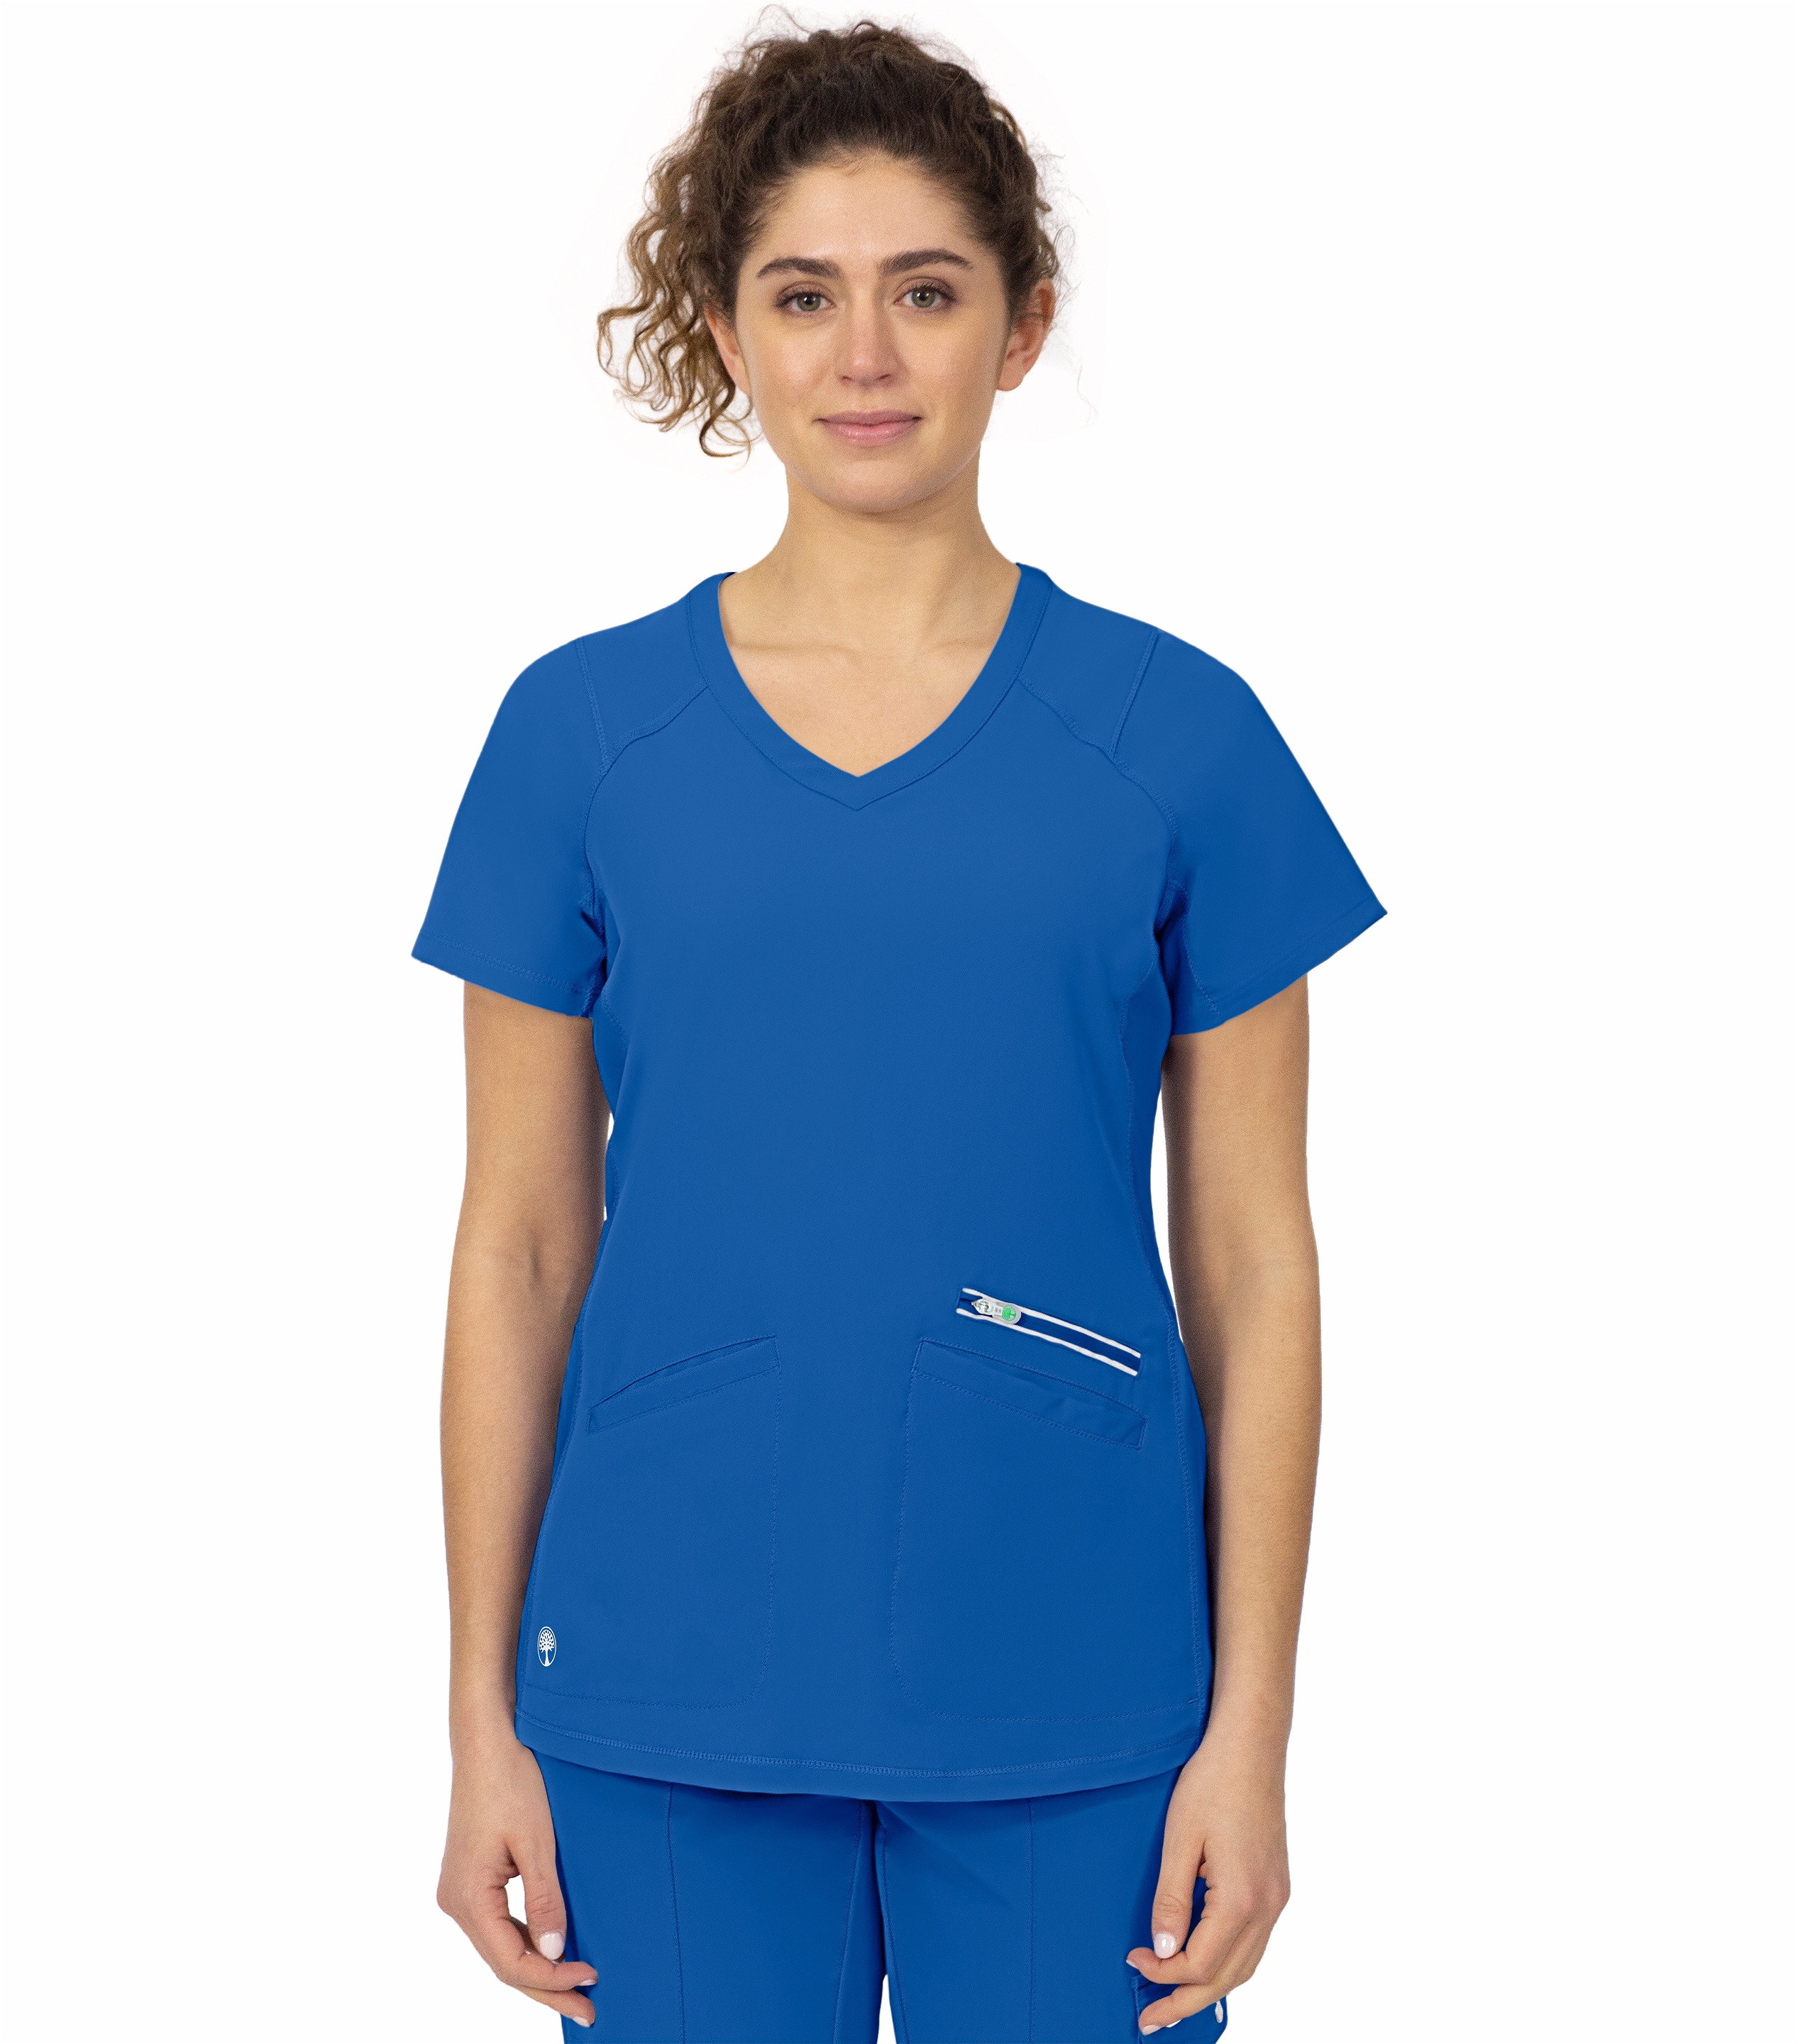 healing hands Scrubs top for Women 3 Pocket Zipper Y-Neck Women's Scrub Top  Light Breathable Stretch Fabric 2254 Sonia HH360 Royal XS 